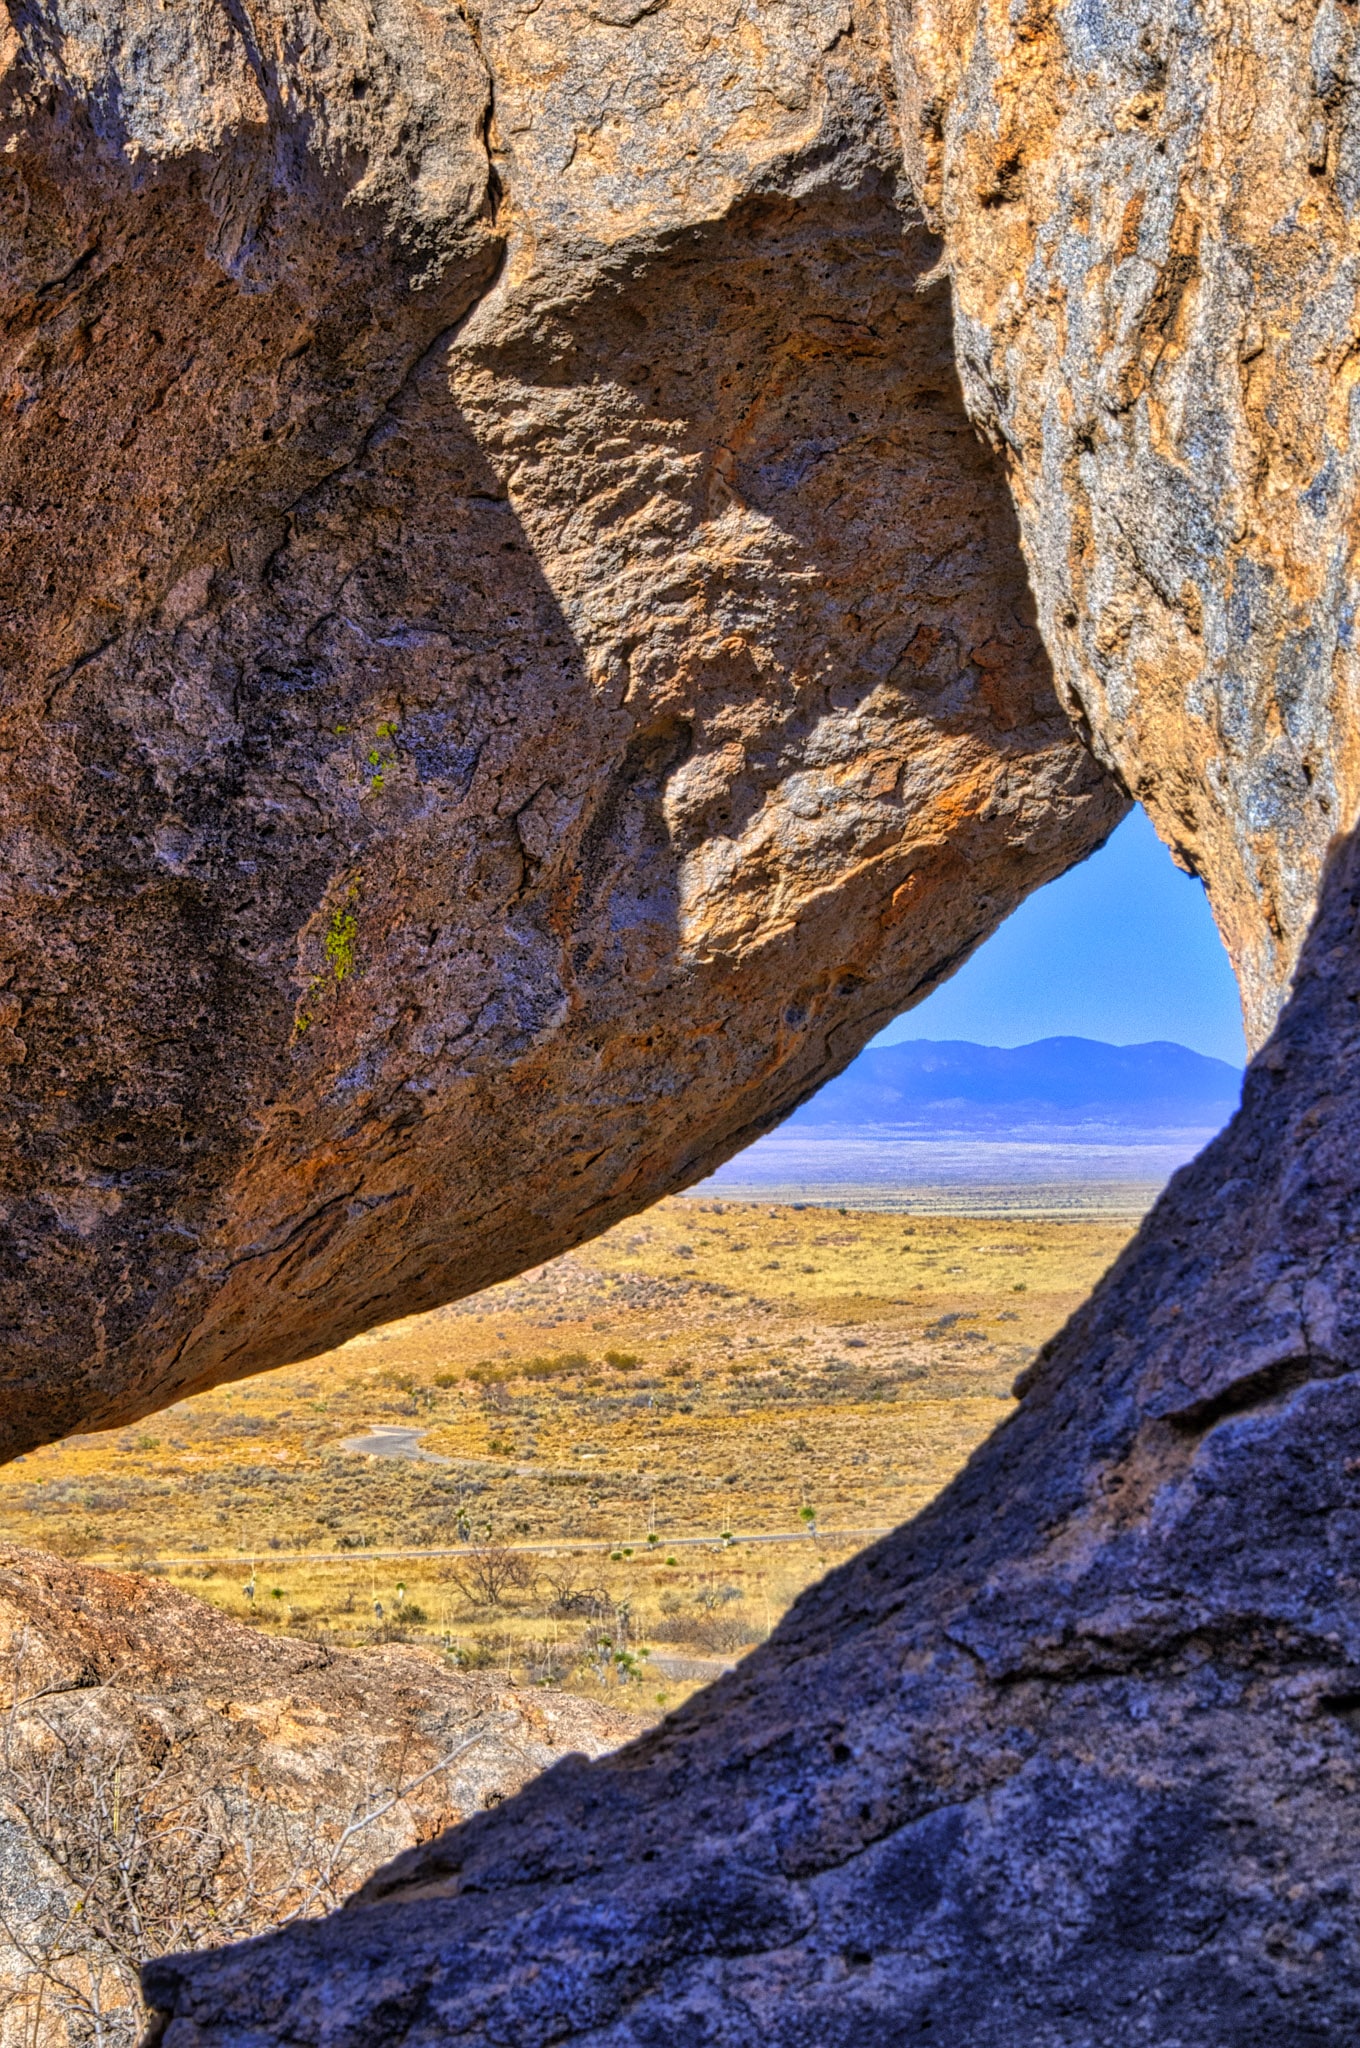 View of the Chihuahuan desert from City of Rocks State Park in New Mexico.